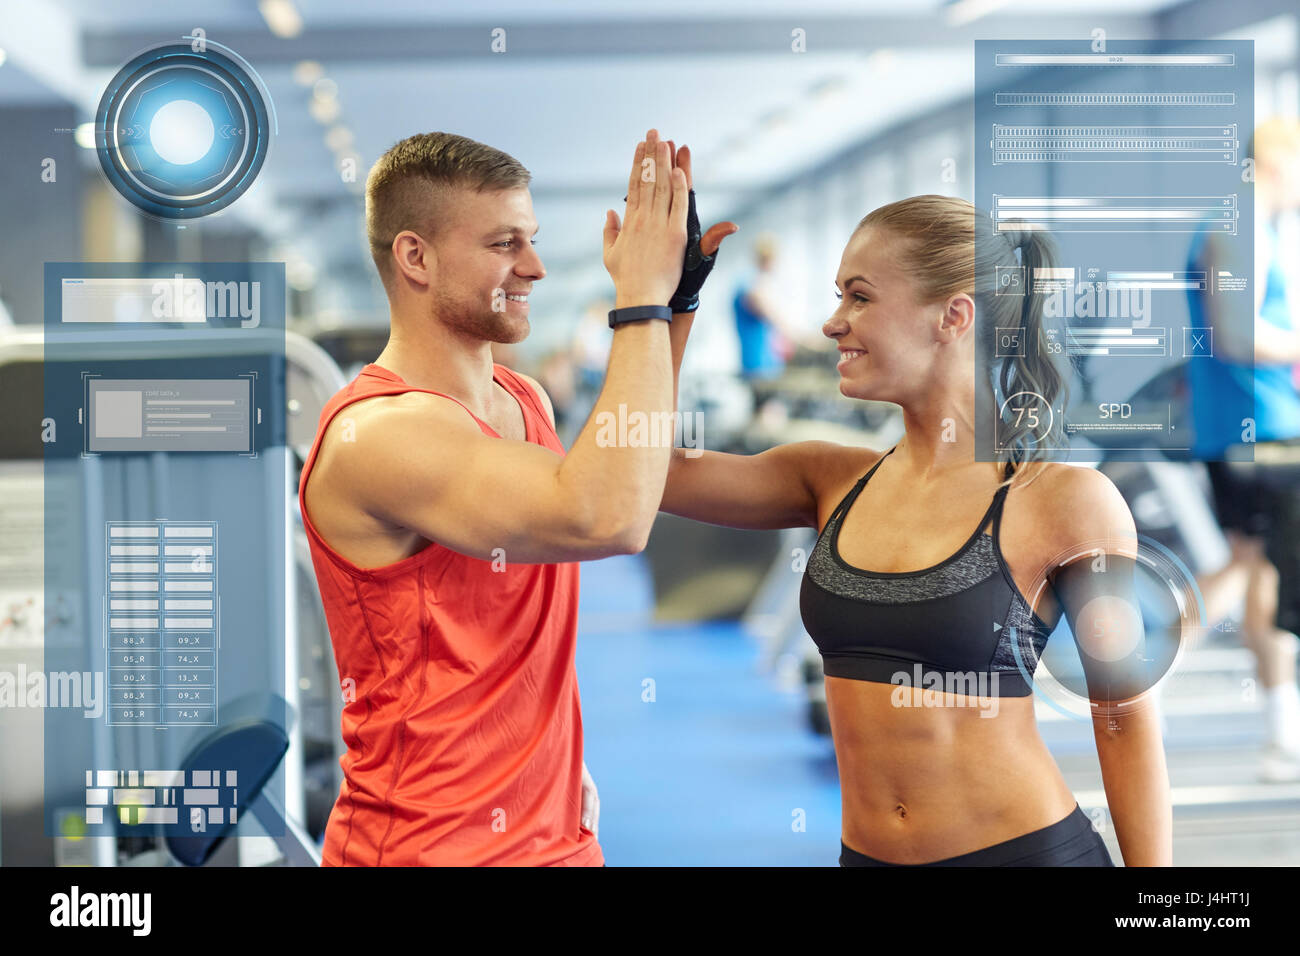 Smiling man et woman doing high five in gym Banque D'Images